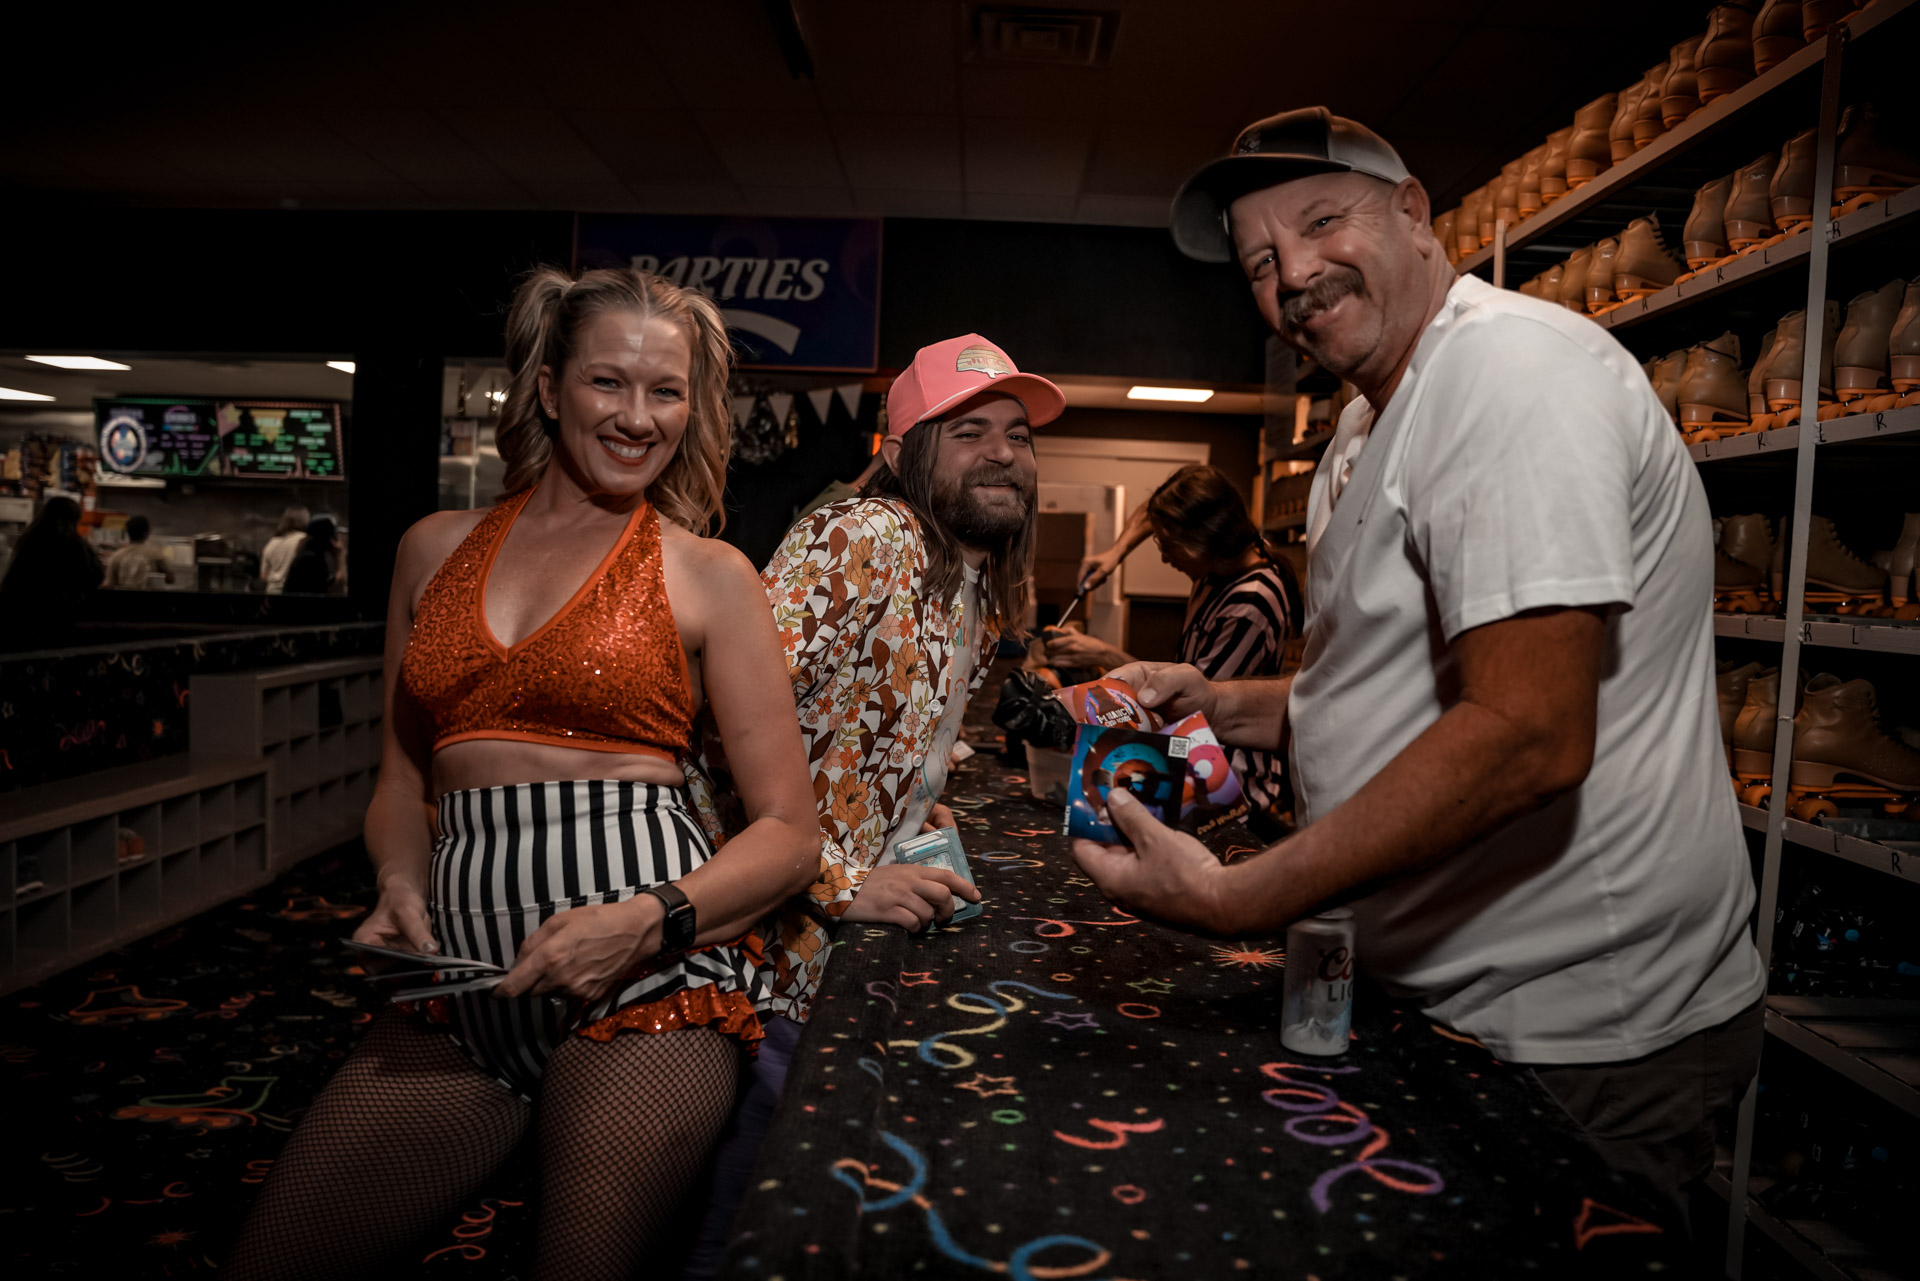 Three people smiling at a roller skate rental booth